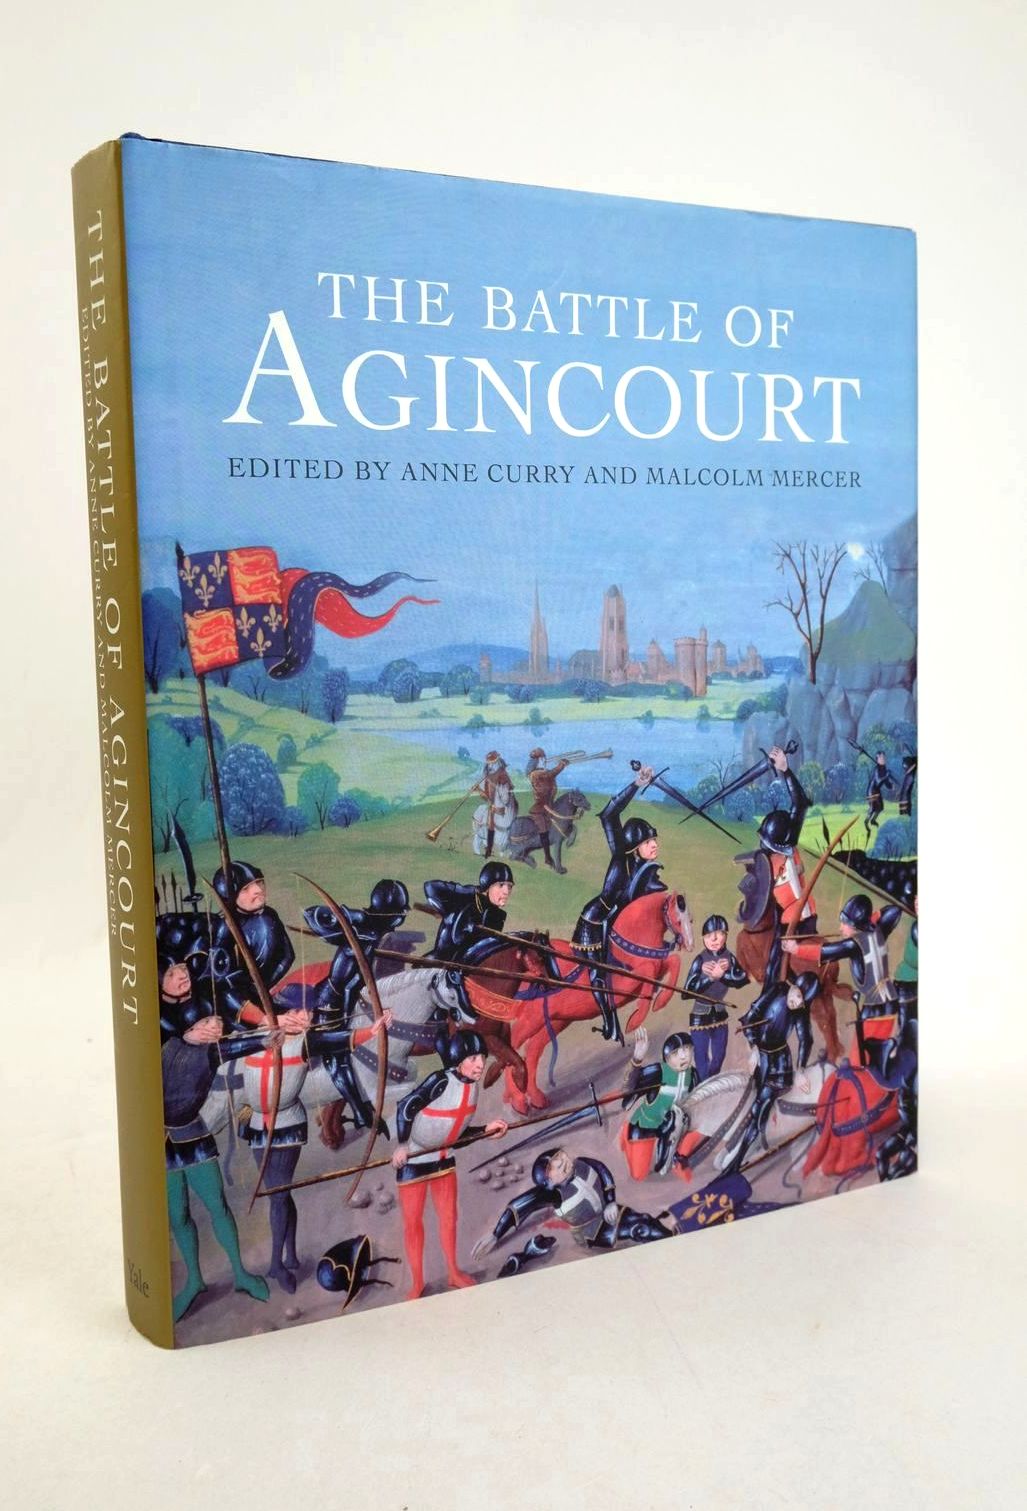 Photo of THE BATTLE OF AGINCOURT written by Curry, Anne Mercer, Malcolm published by Yale University Press (STOCK CODE: 1327803)  for sale by Stella & Rose's Books